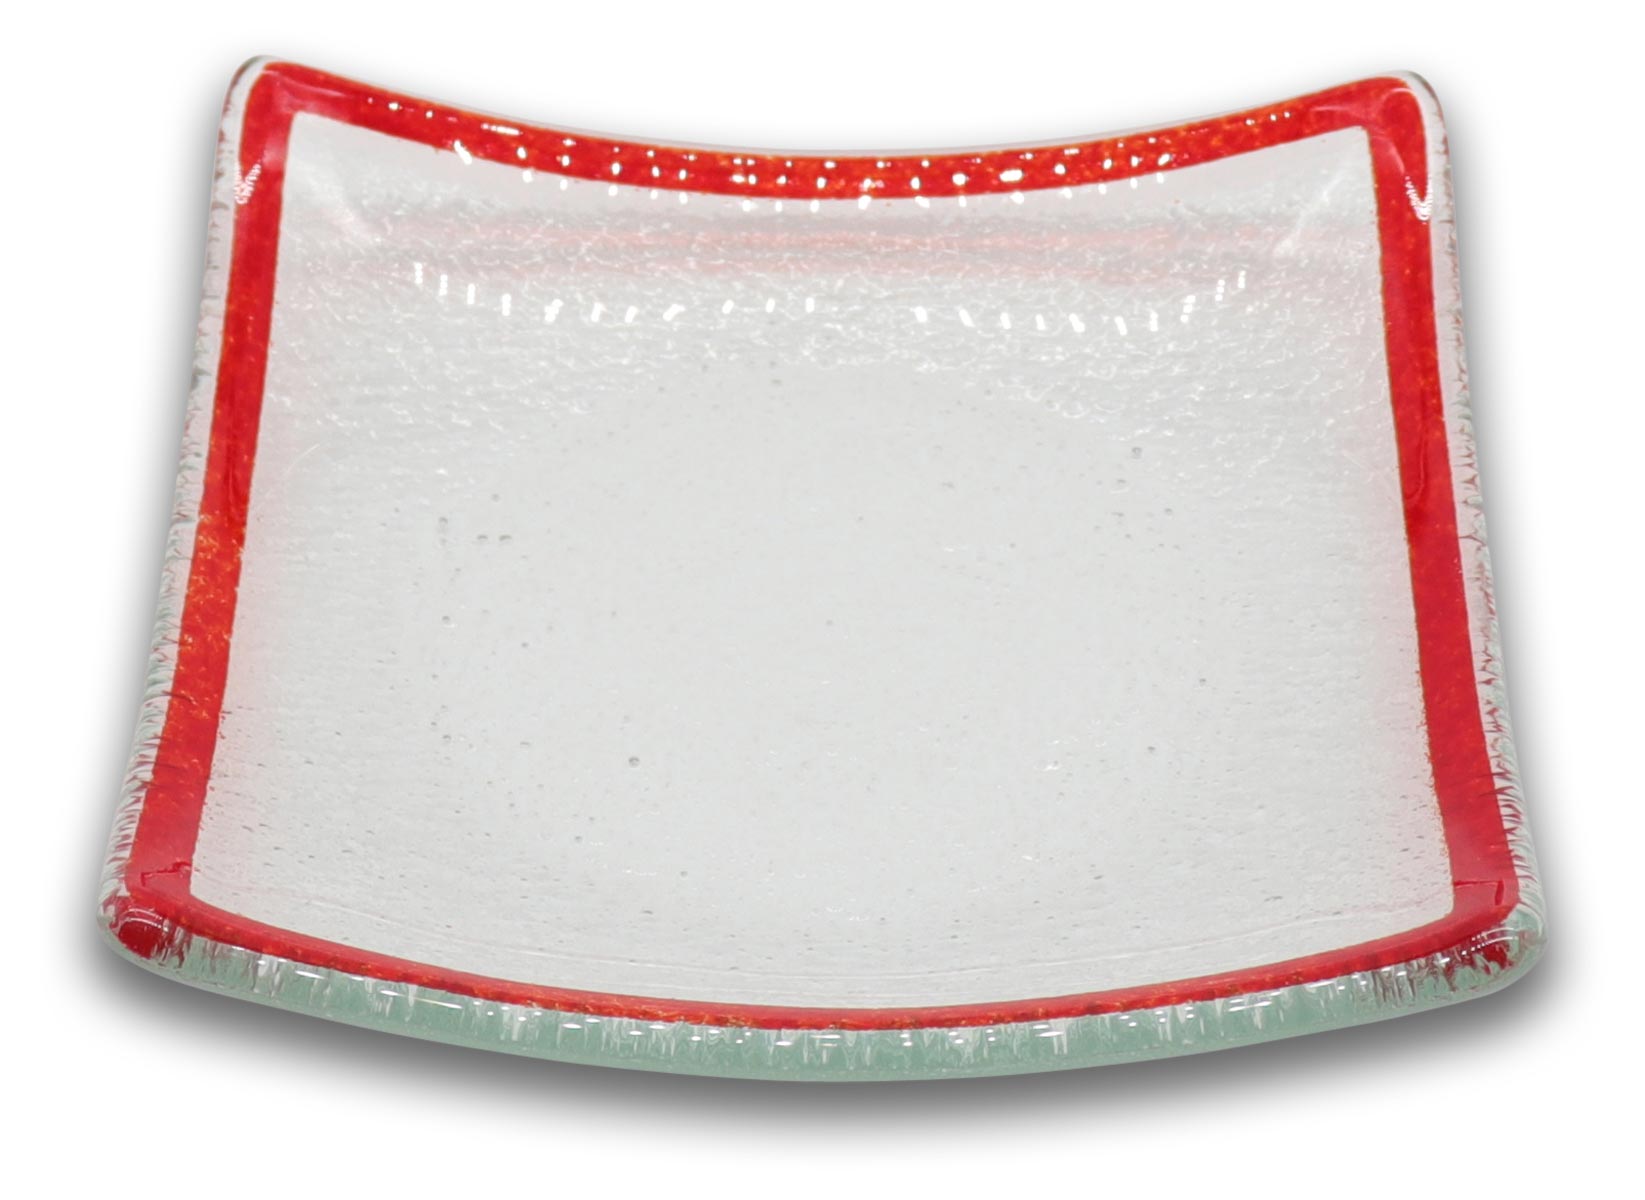 Vaulted glass plate with border bordeaux, 